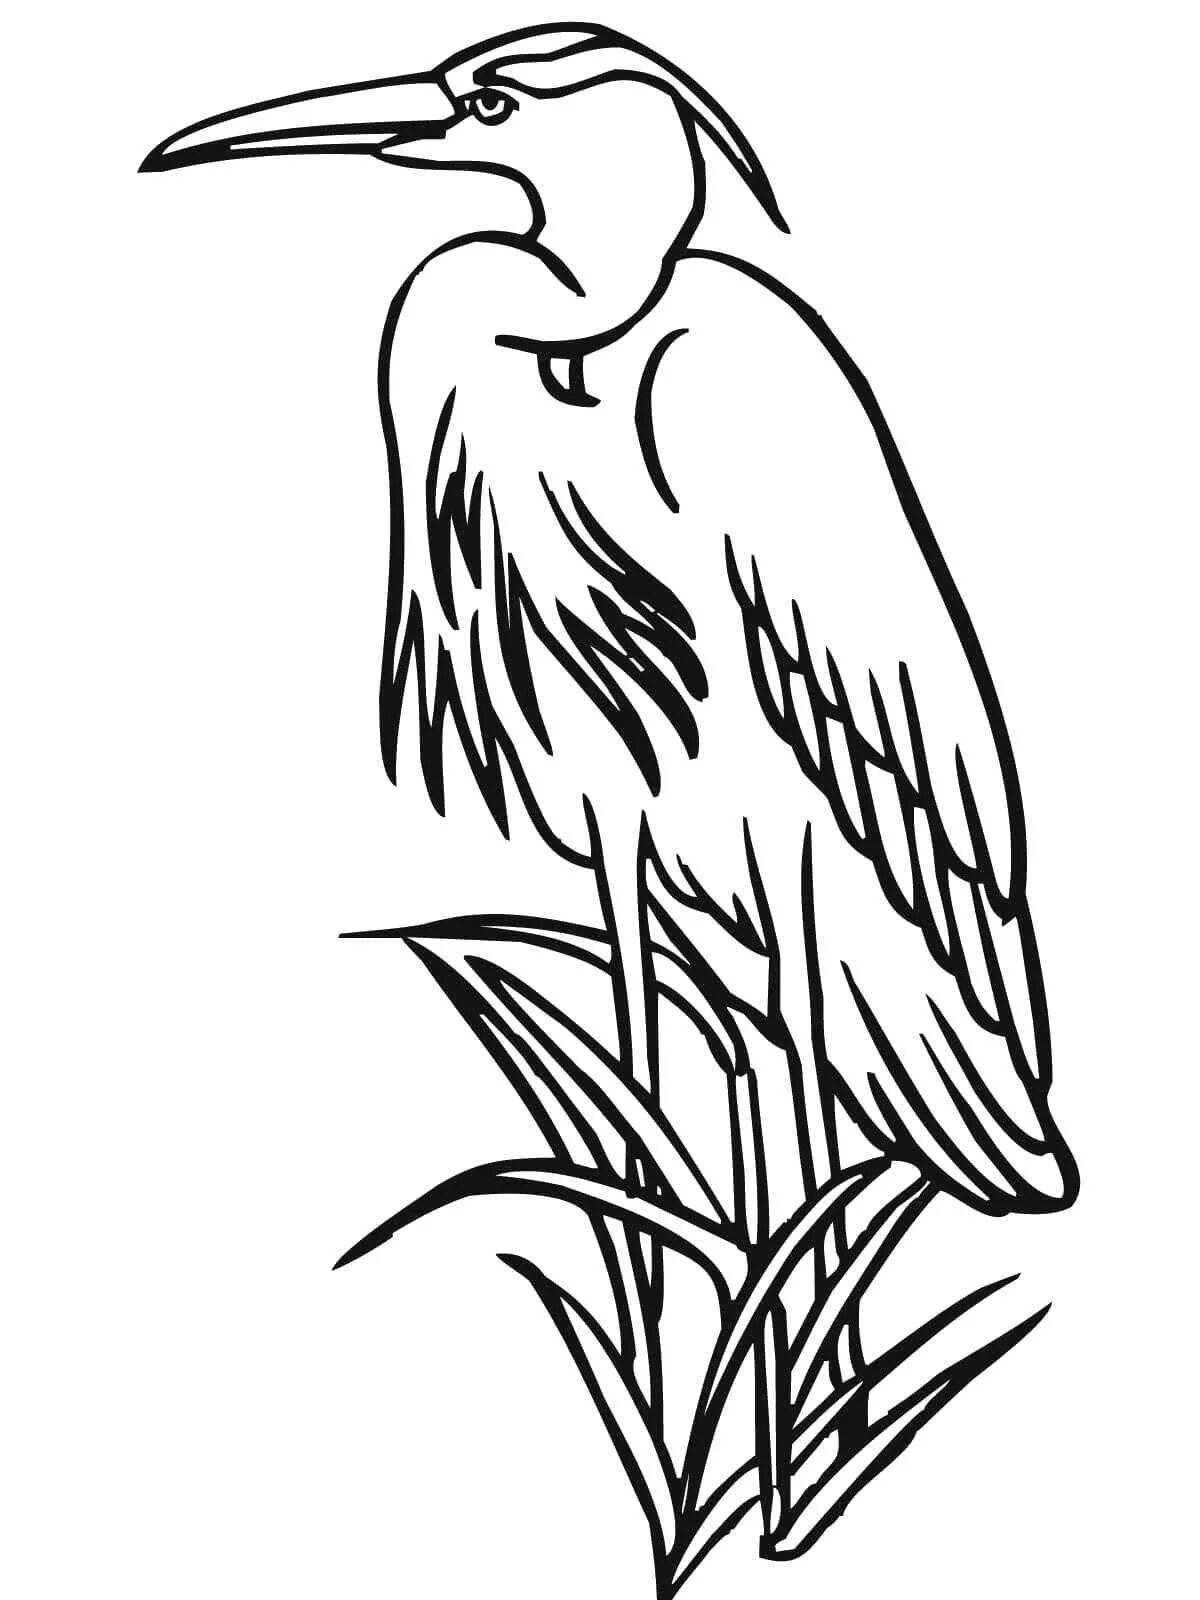 Fairy egret coloring pages for kids